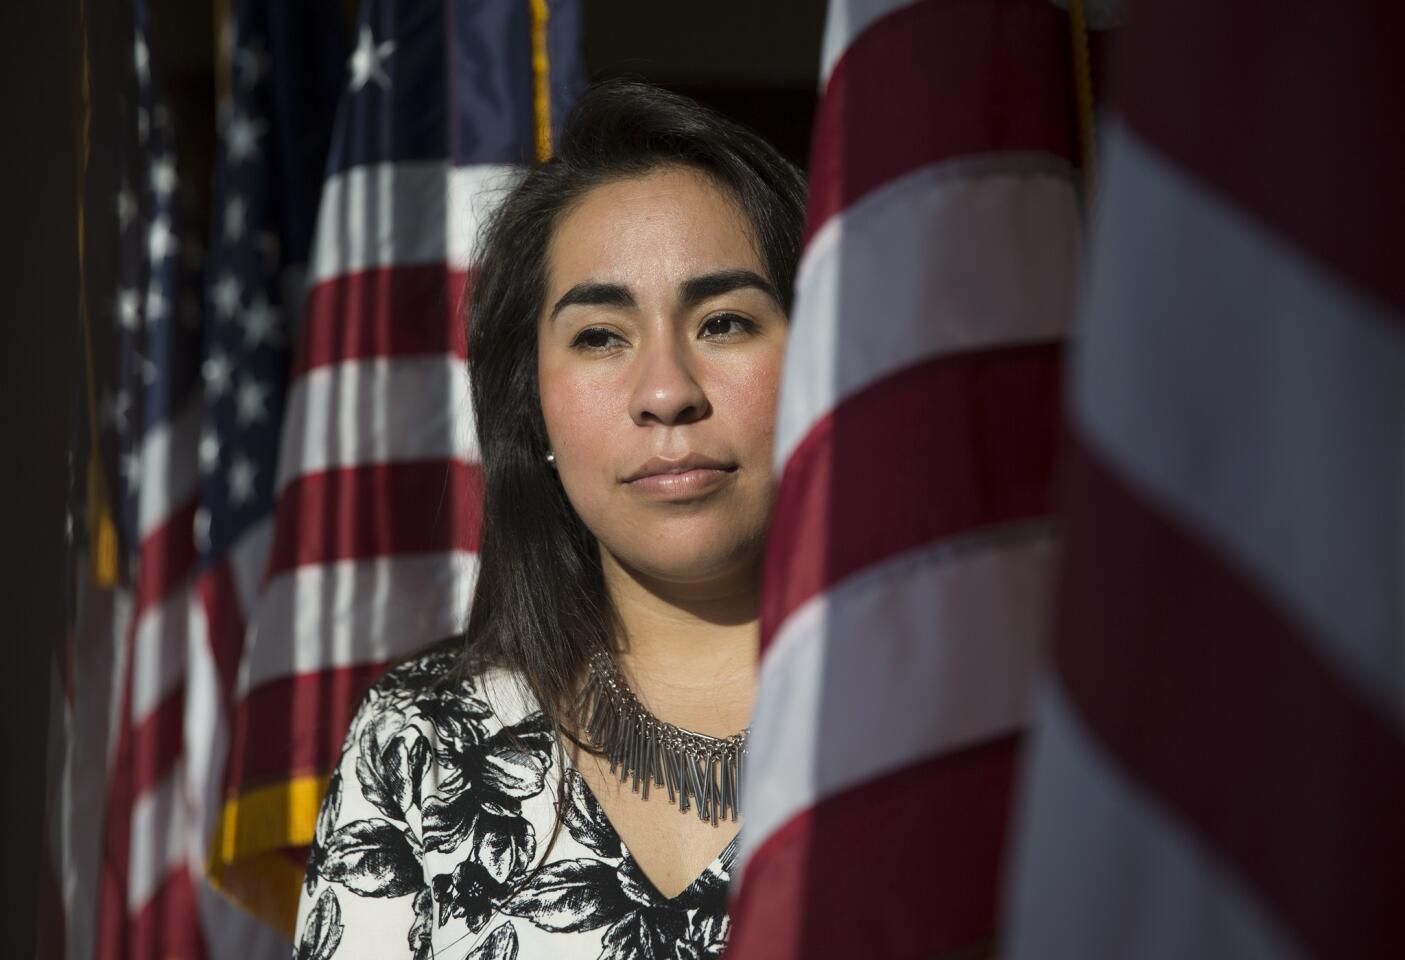 Maribel Marroquin, 25, is a Mexican American college student who says she has spent thousands of hours knocking on doors trying to register Latinos to become part of the GOP: "To have worked so hard and taken so many steps forward and then to have somebody like Trump with his comments come in, it just sets us back a lot."